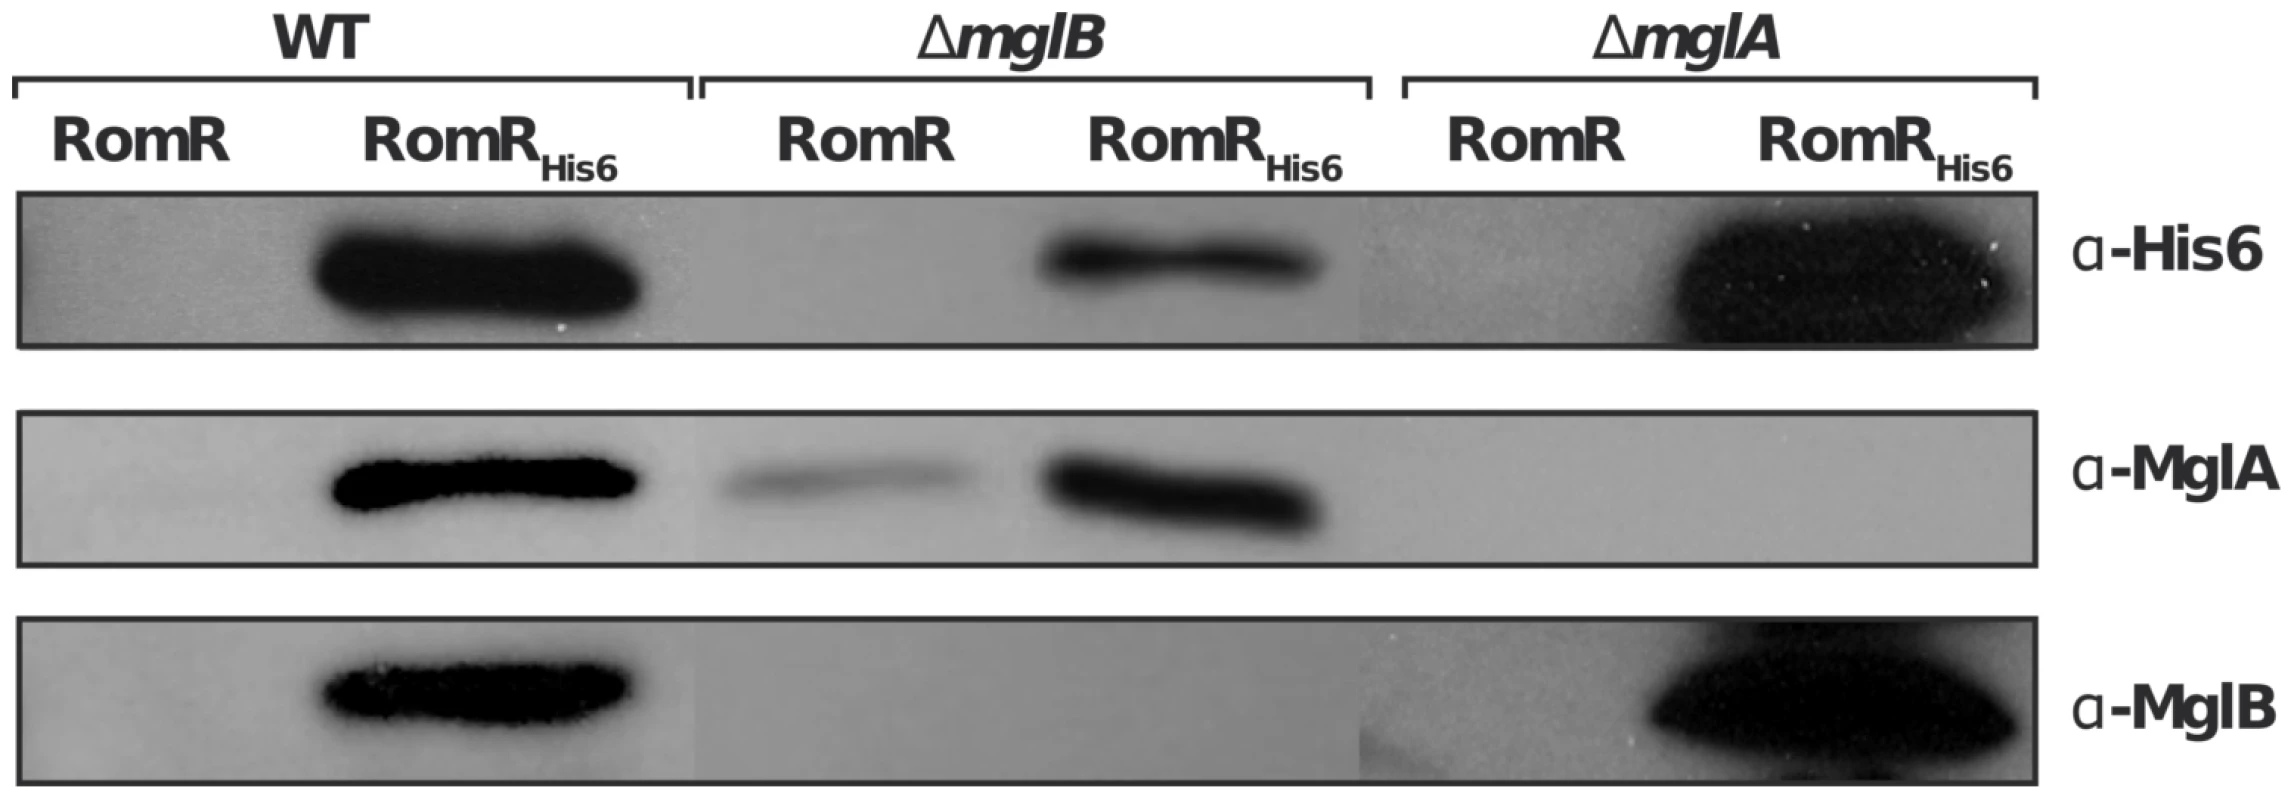 RomR interacts with both MglB and MglA independently.